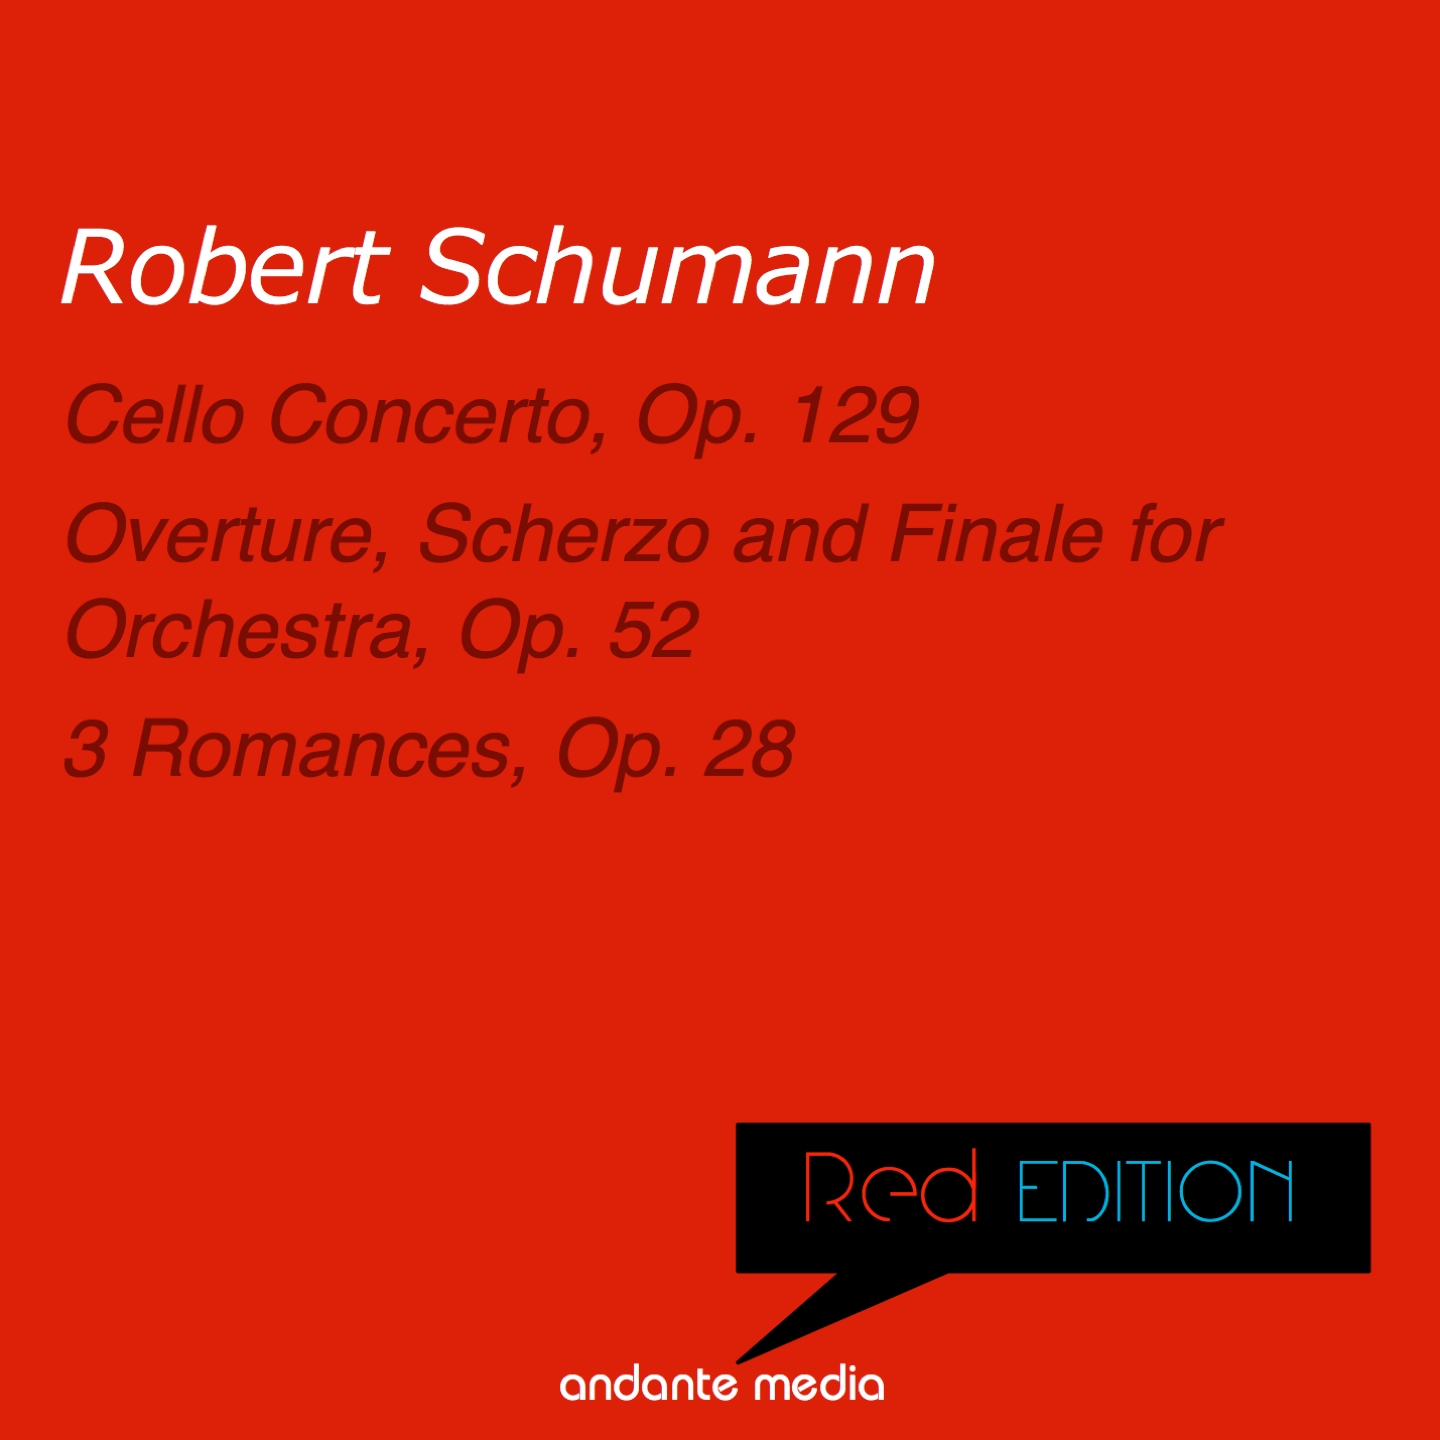 Red Edition - Schumann: Cello Concerto, Op. 129 & Overture, Scherzo and Finale for Orchestra, Op. 52